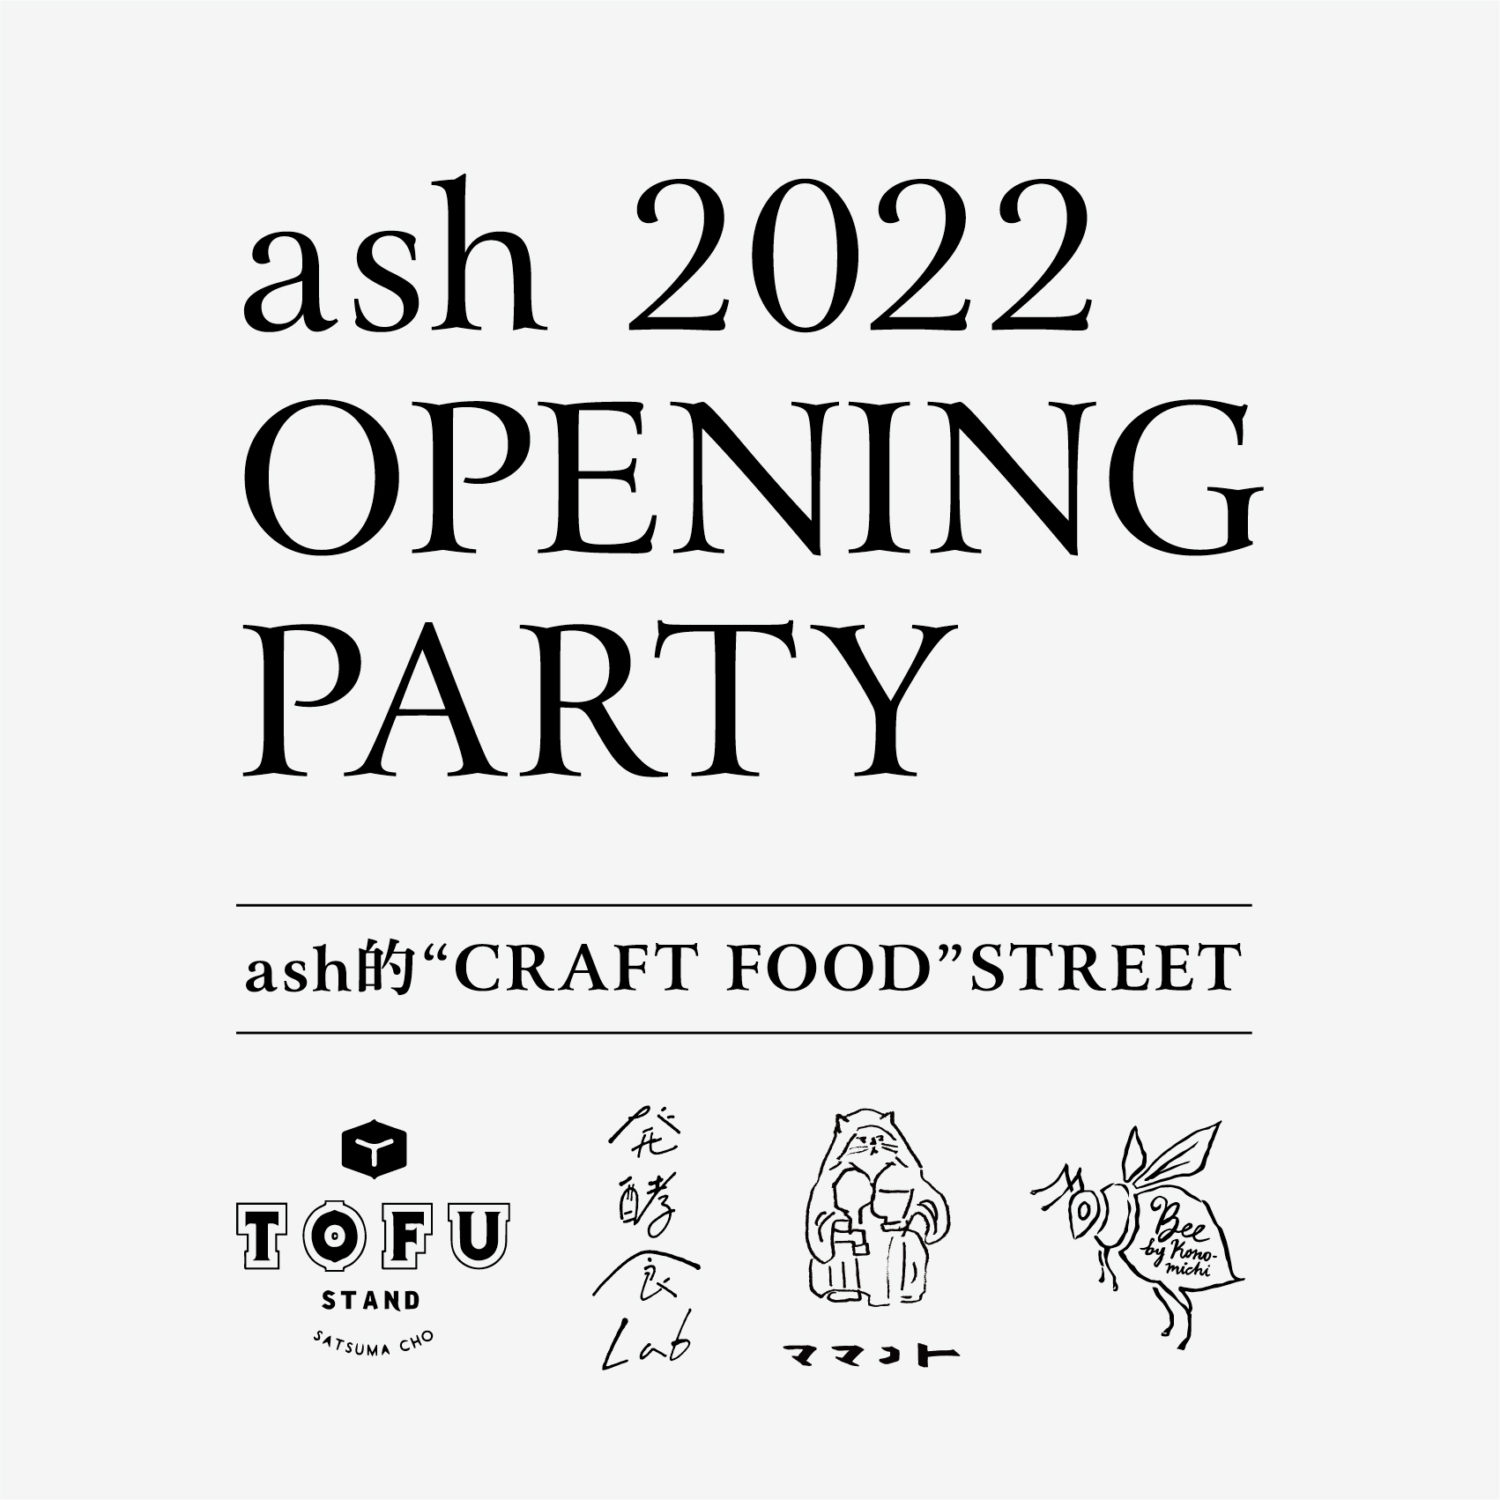 ash 2022 OPENING PARTY